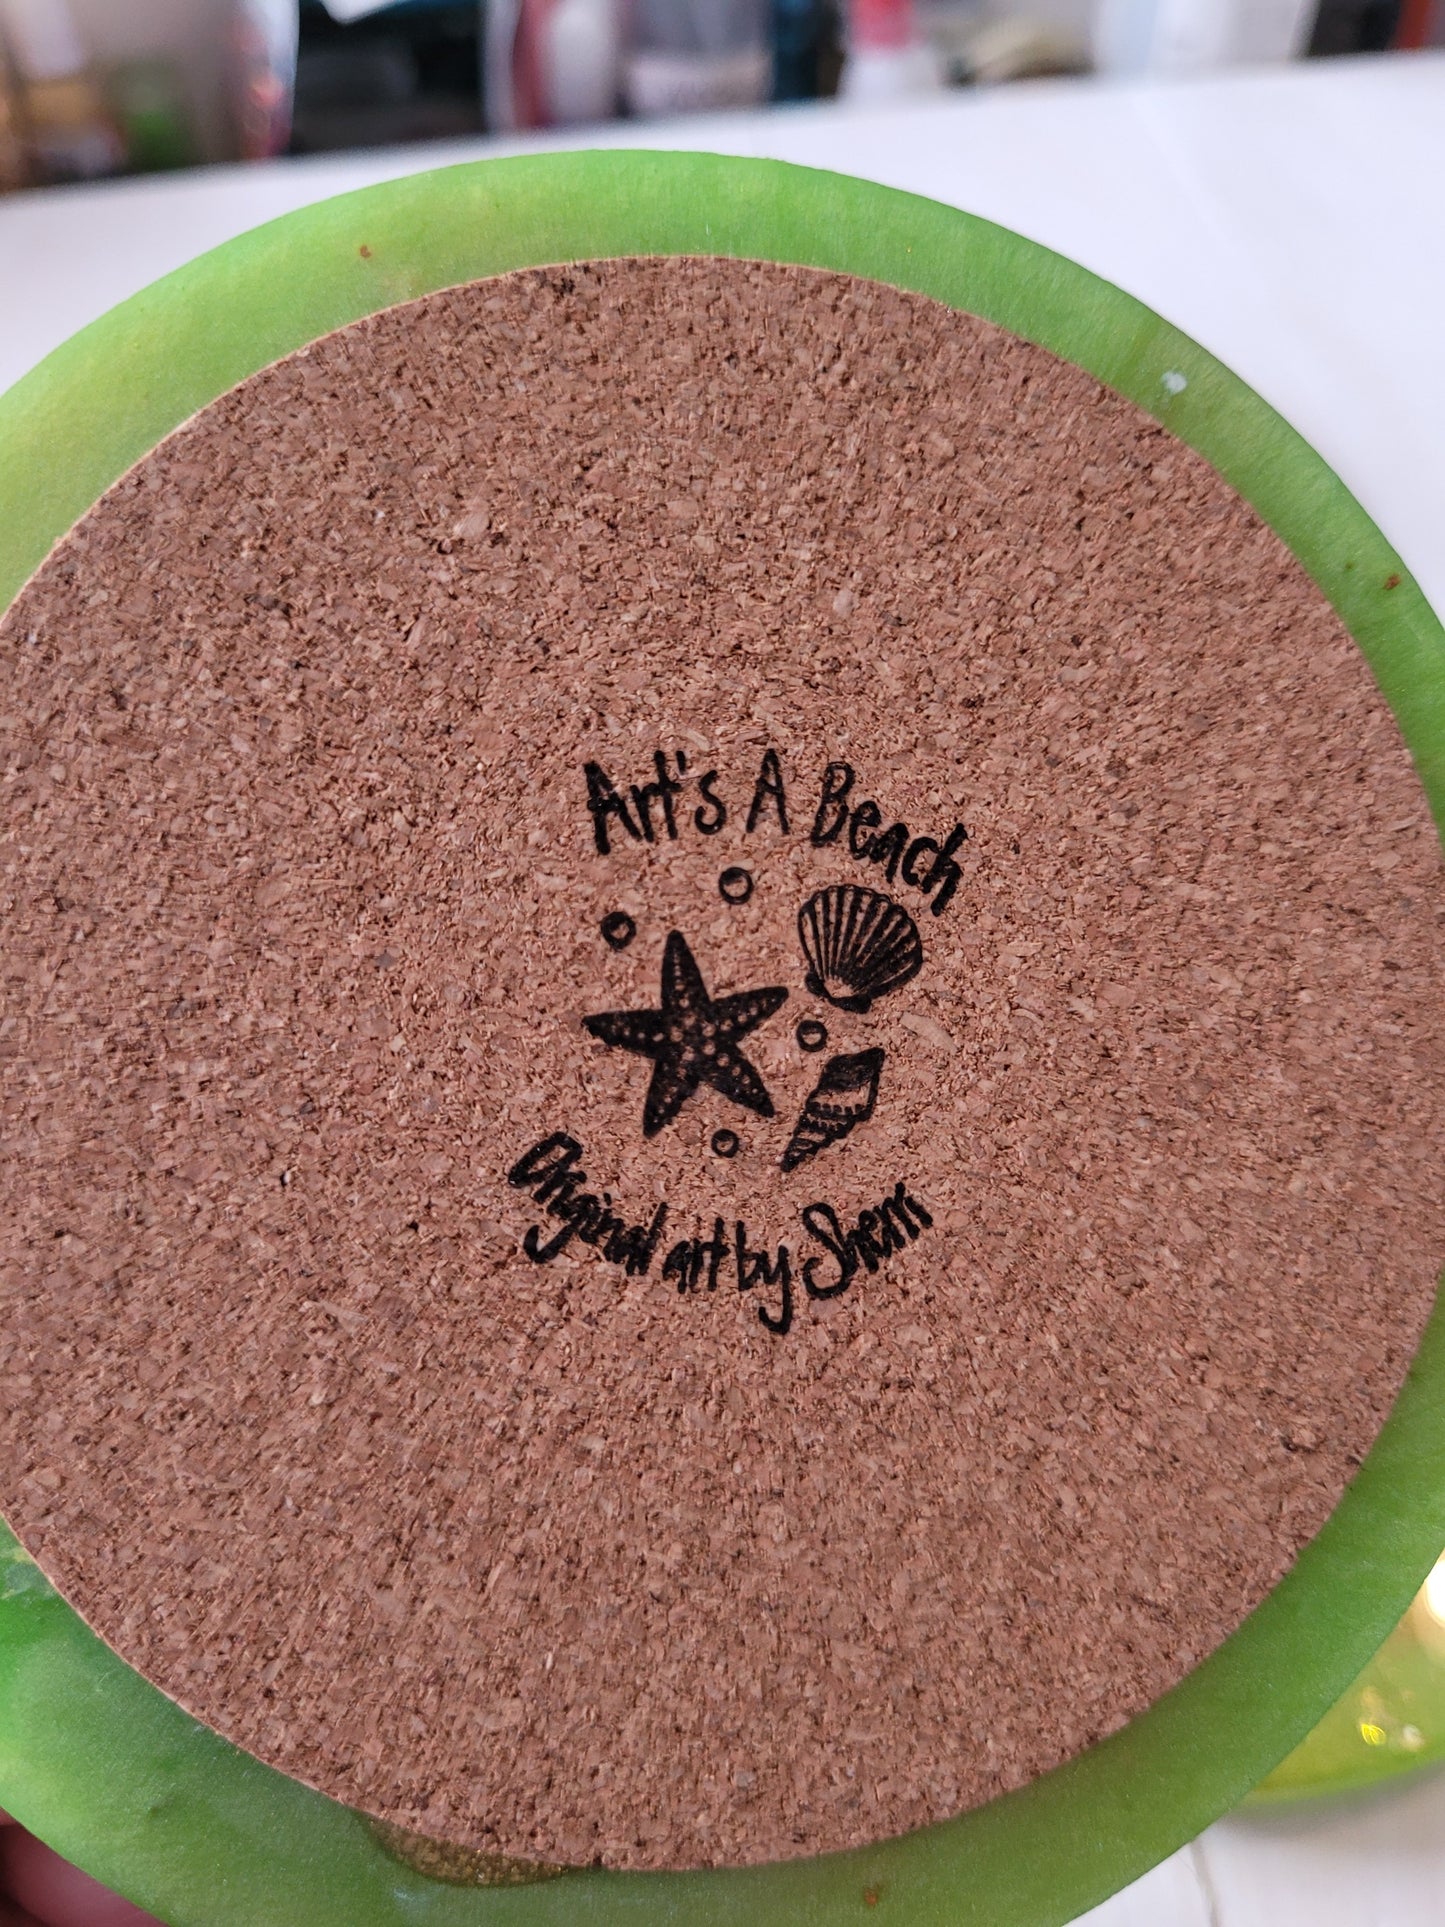 Lovely whimsical lime coasters, set of 4.